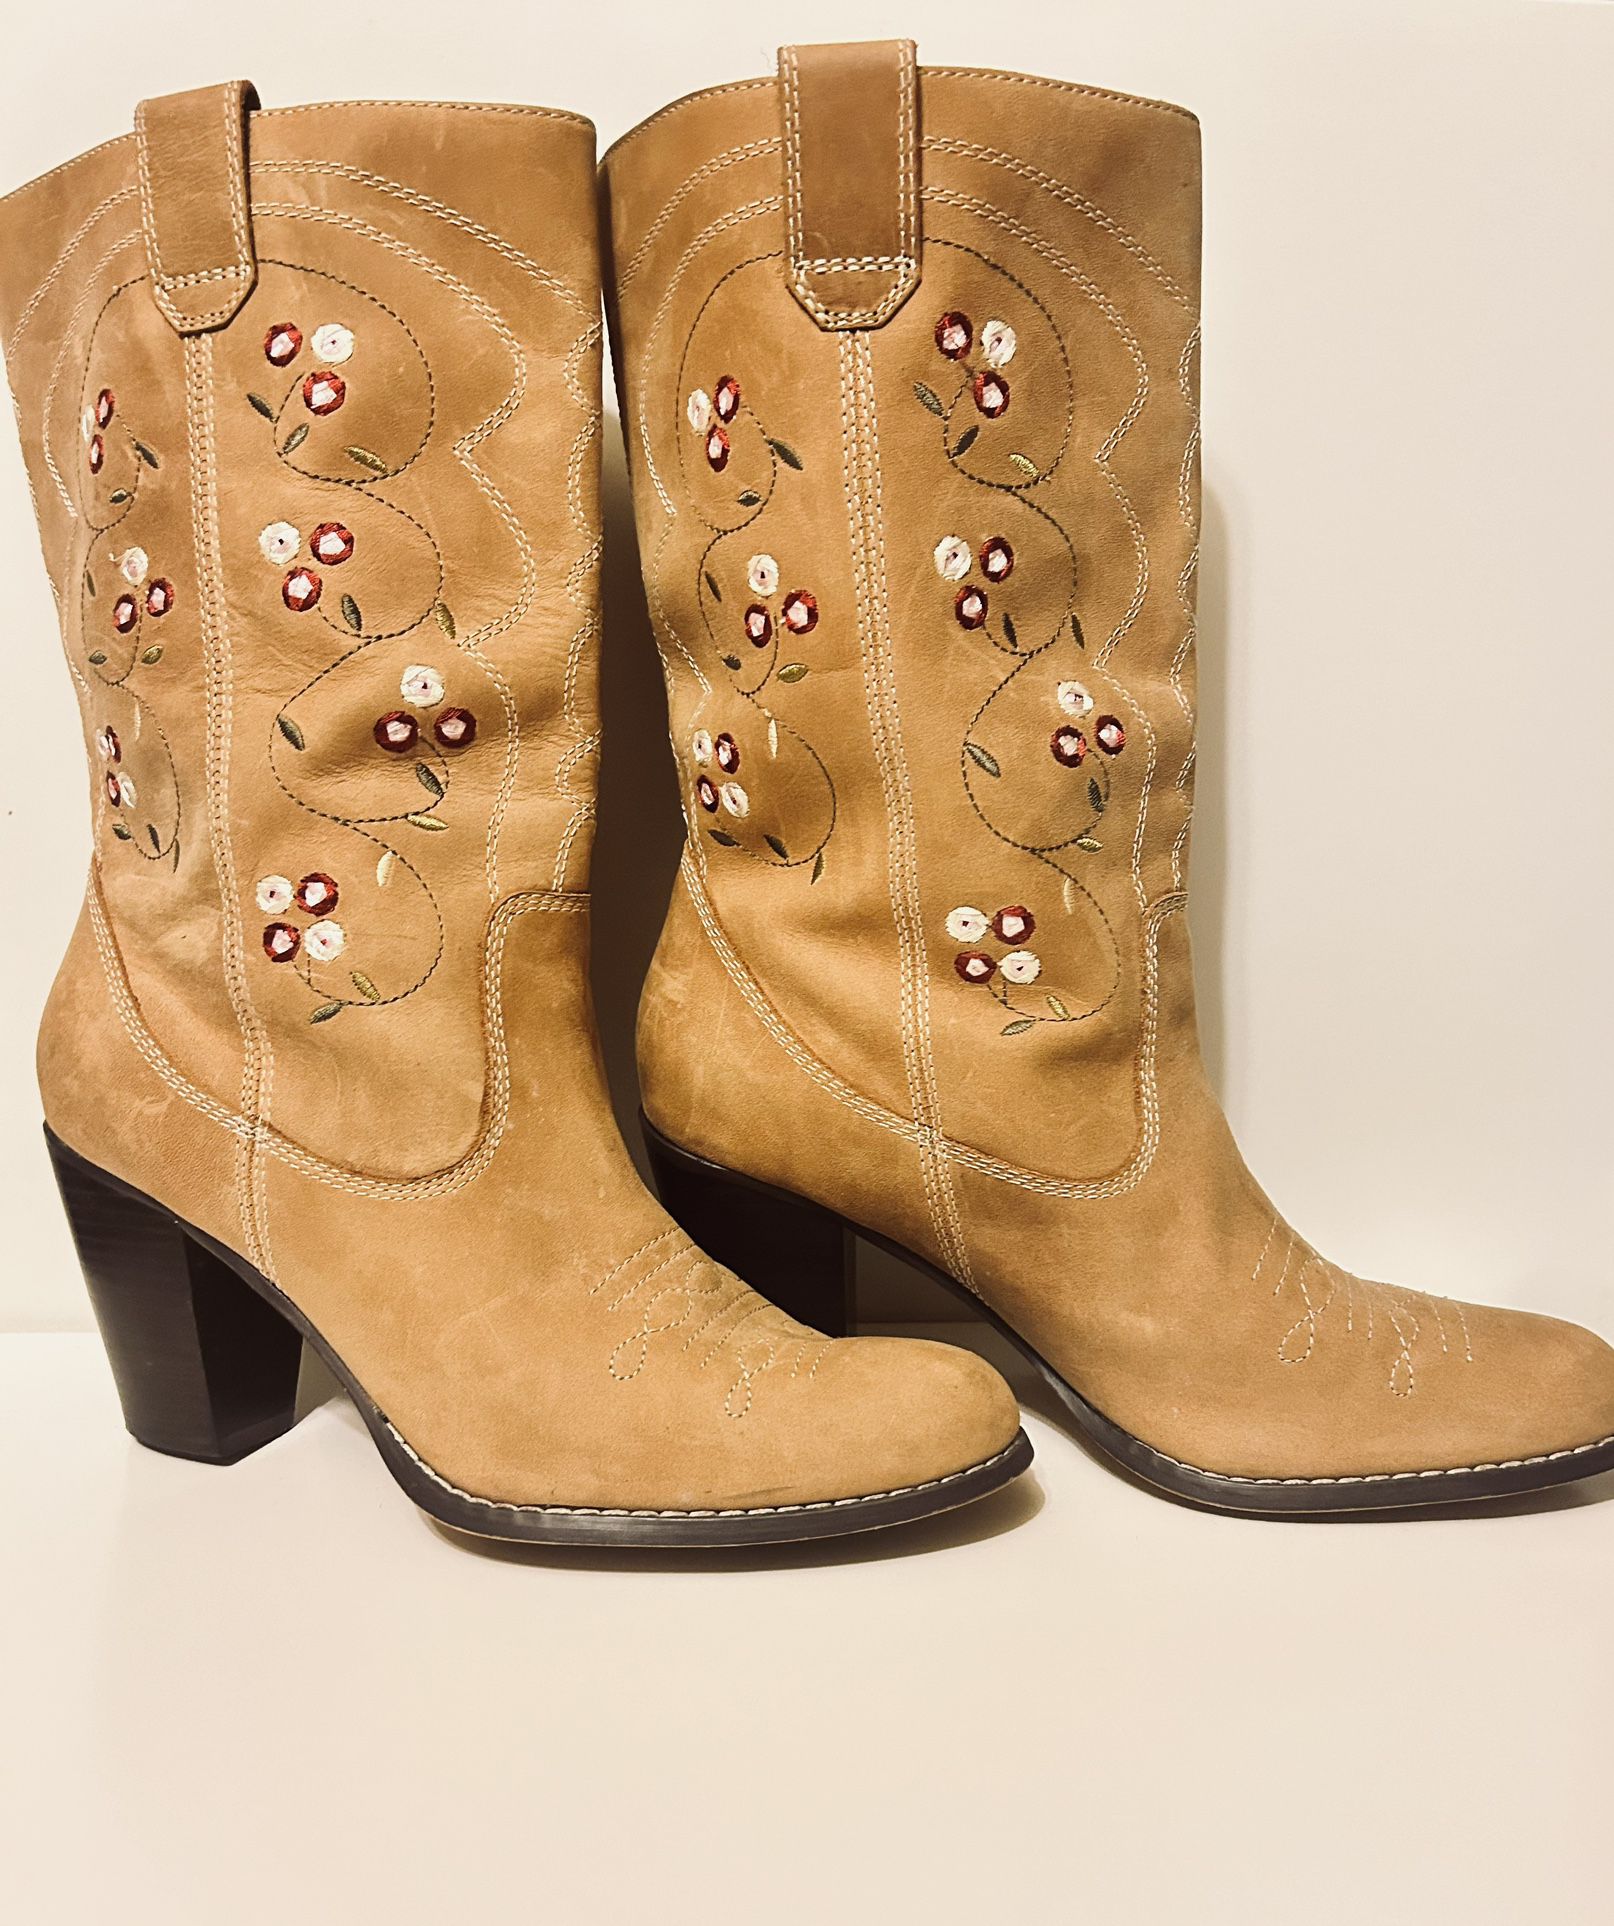 SEYCHELLES SUEDE LEATHER FLORAL EMBROIDERED WESTERN BOOTS/TAN Size 8.5